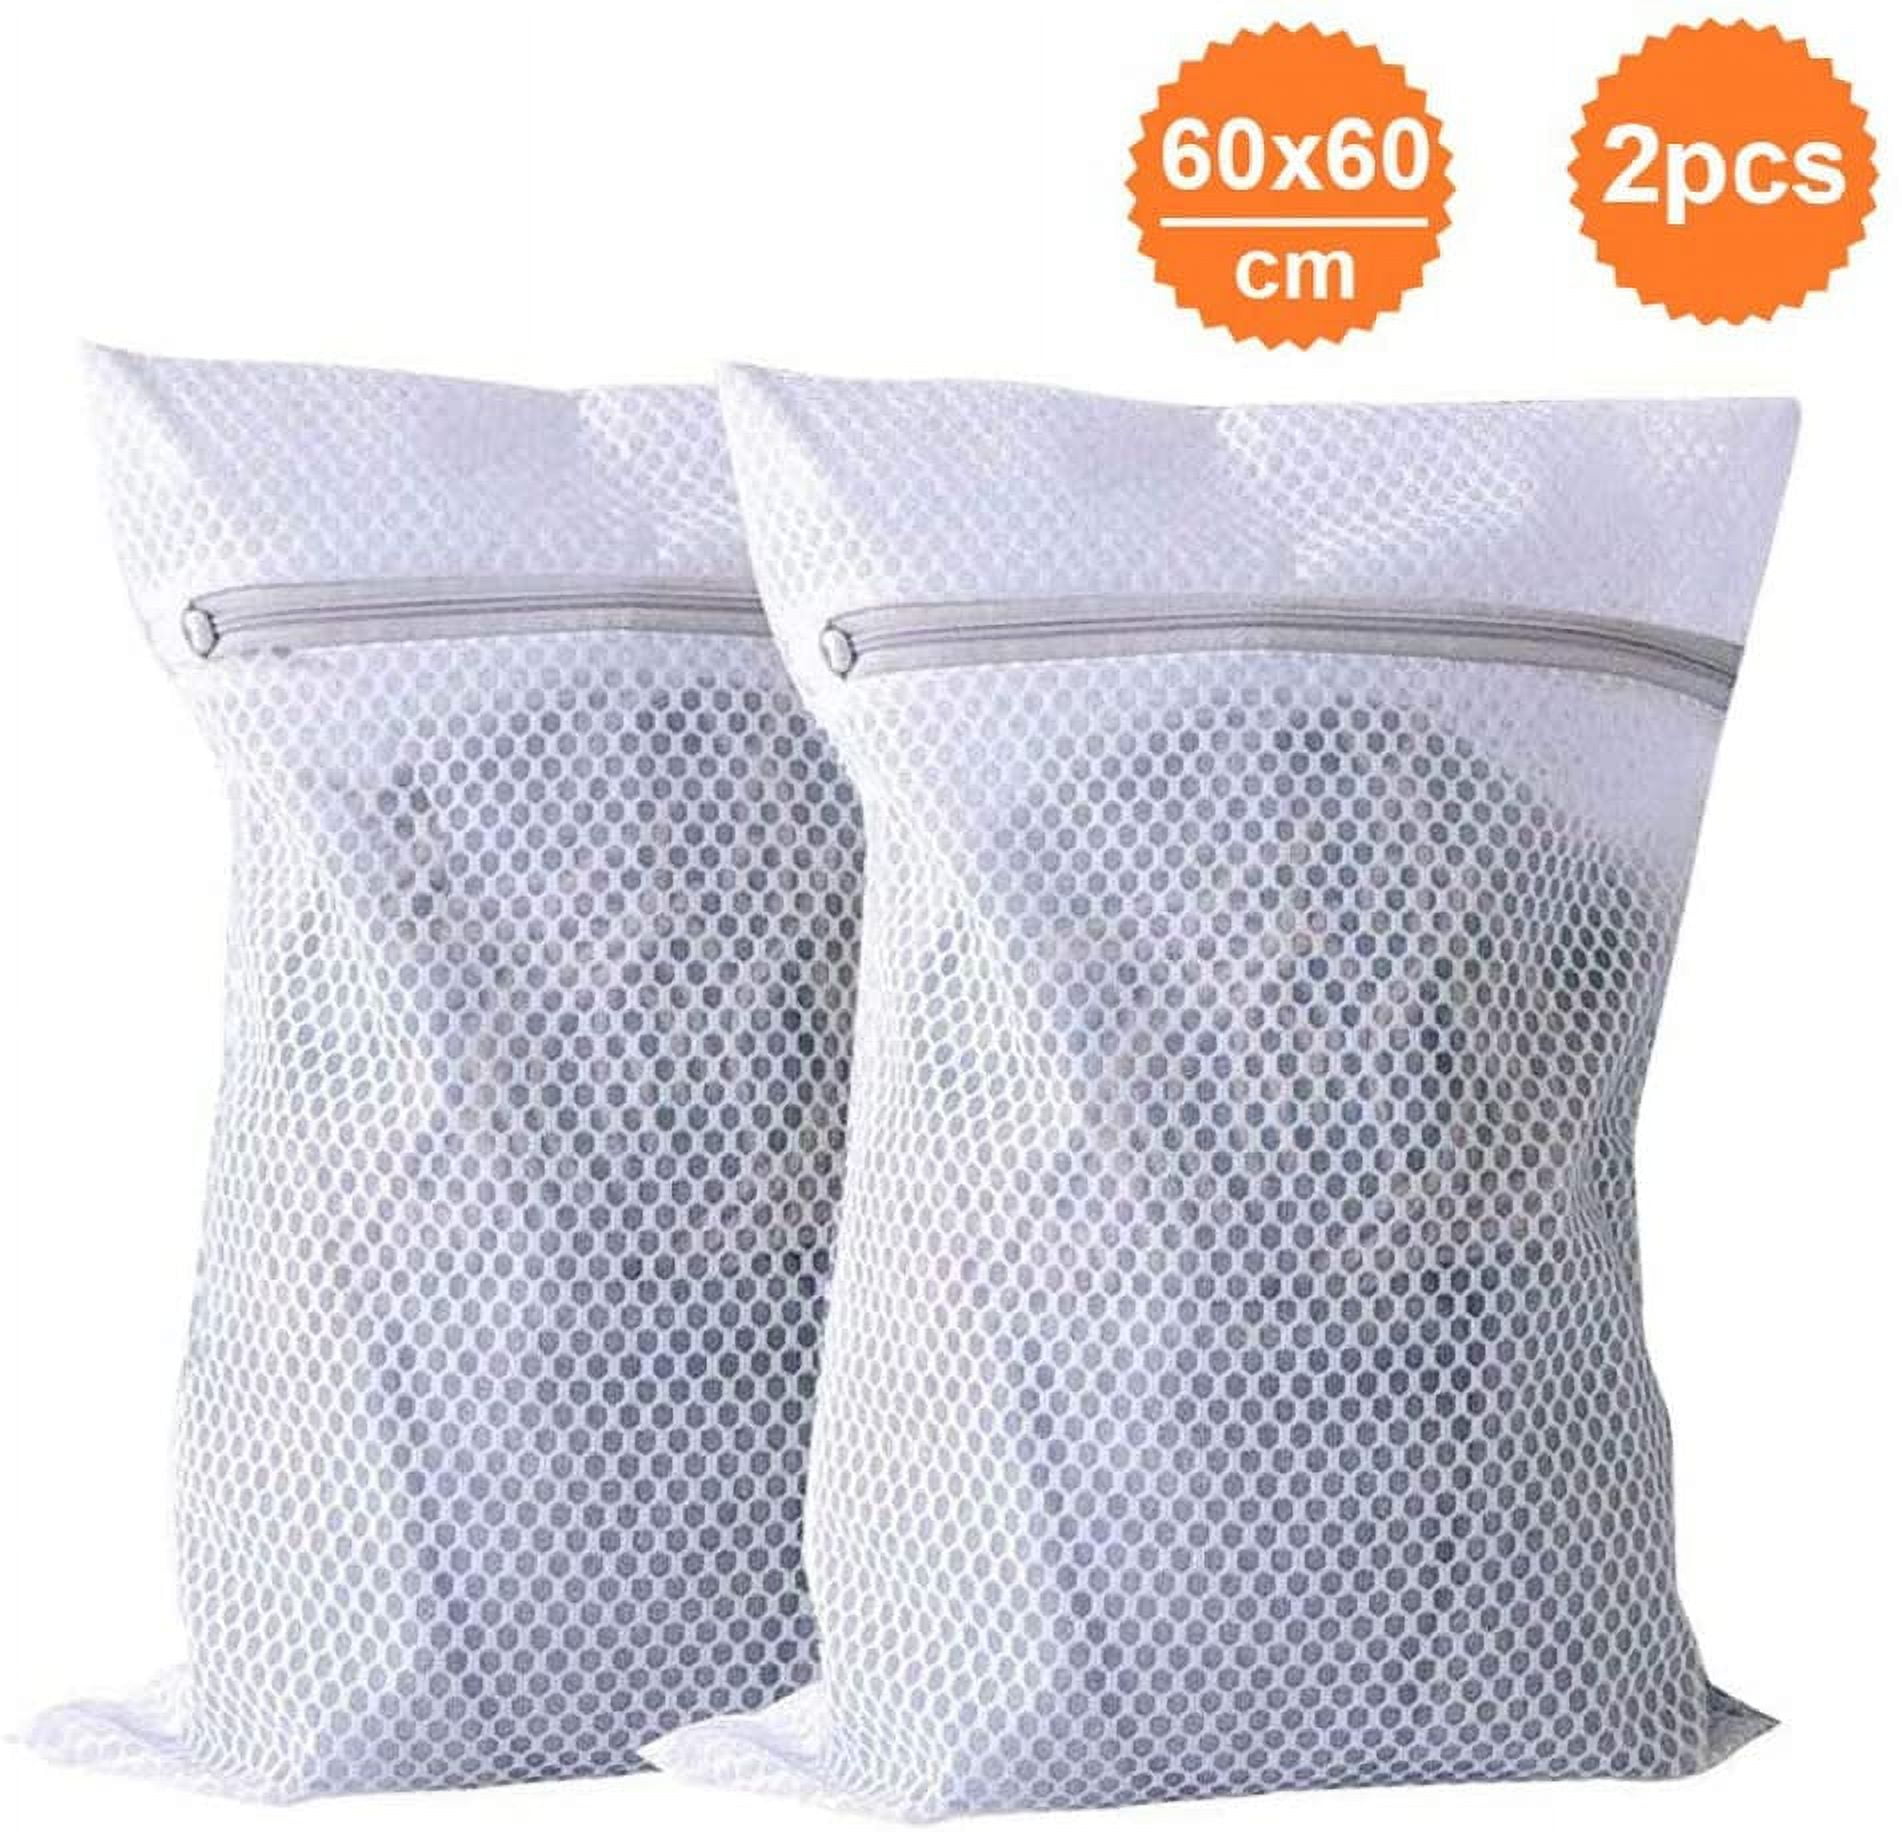 Laundry Bags, Set of 2 (Extra Large) Mesh with Zipper for Delicates, ,  Lingerie, Bras, Laundry, Accessories Wash Bag, Travel Organizer Net Bag  (White) 